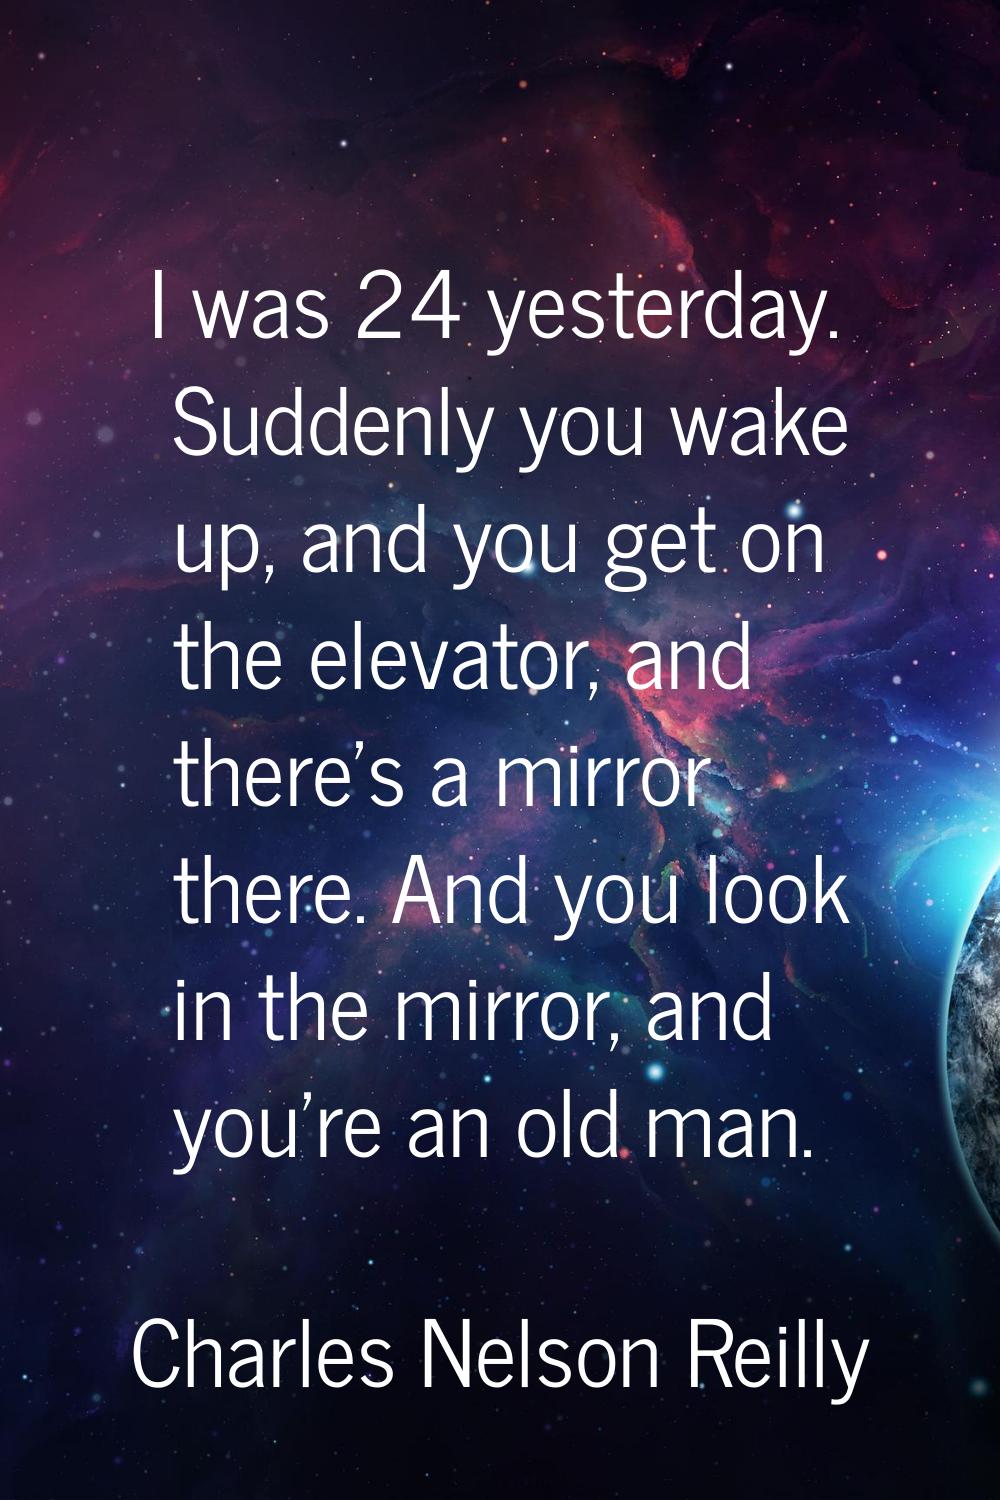 I was 24 yesterday. Suddenly you wake up, and you get on the elevator, and there's a mirror there. 